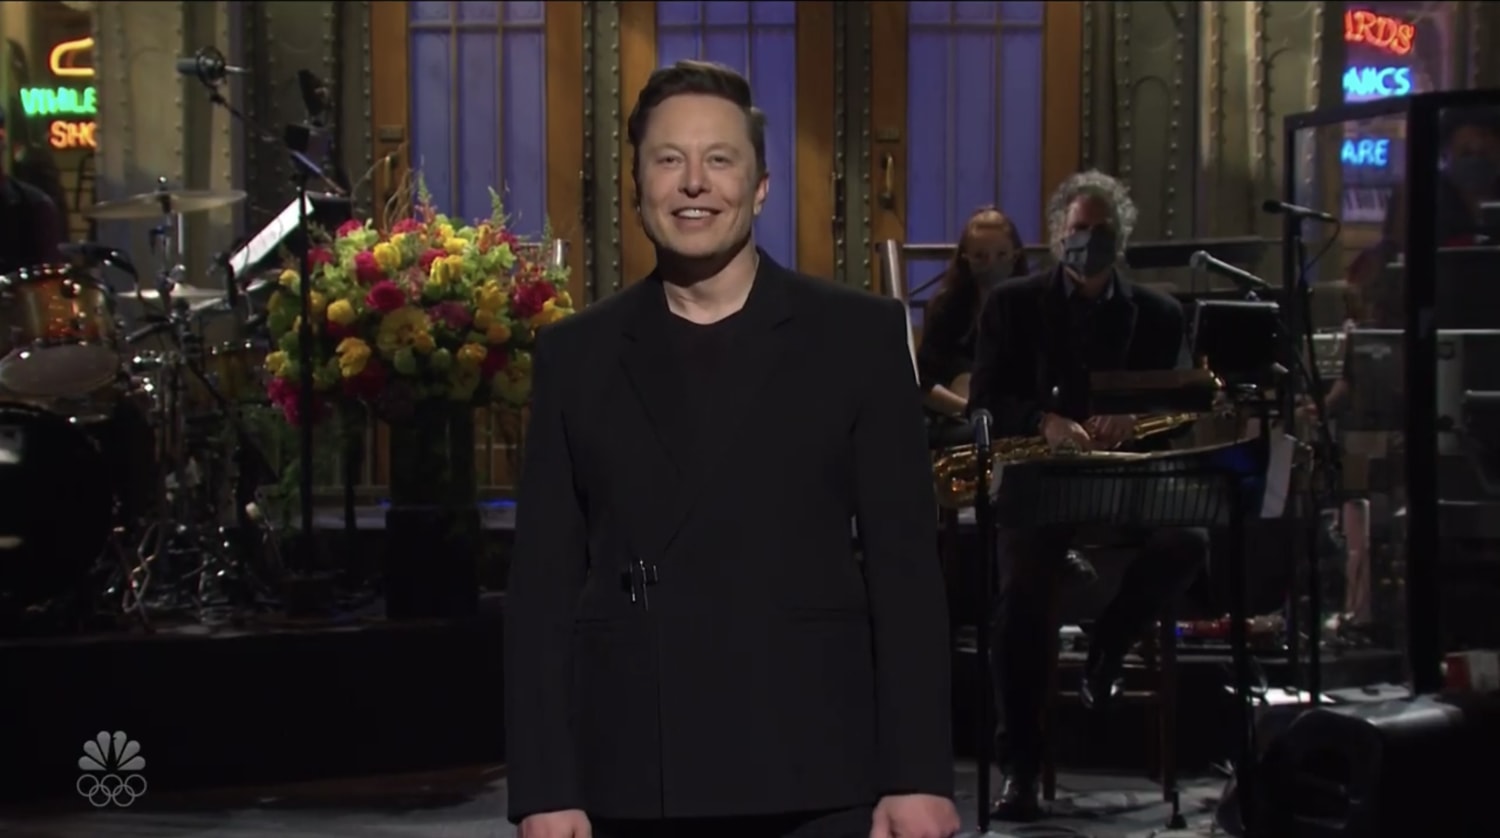 Elon Musk Delivers Laughs Tips Hat To Cryptocurrency On Saturday Night Live